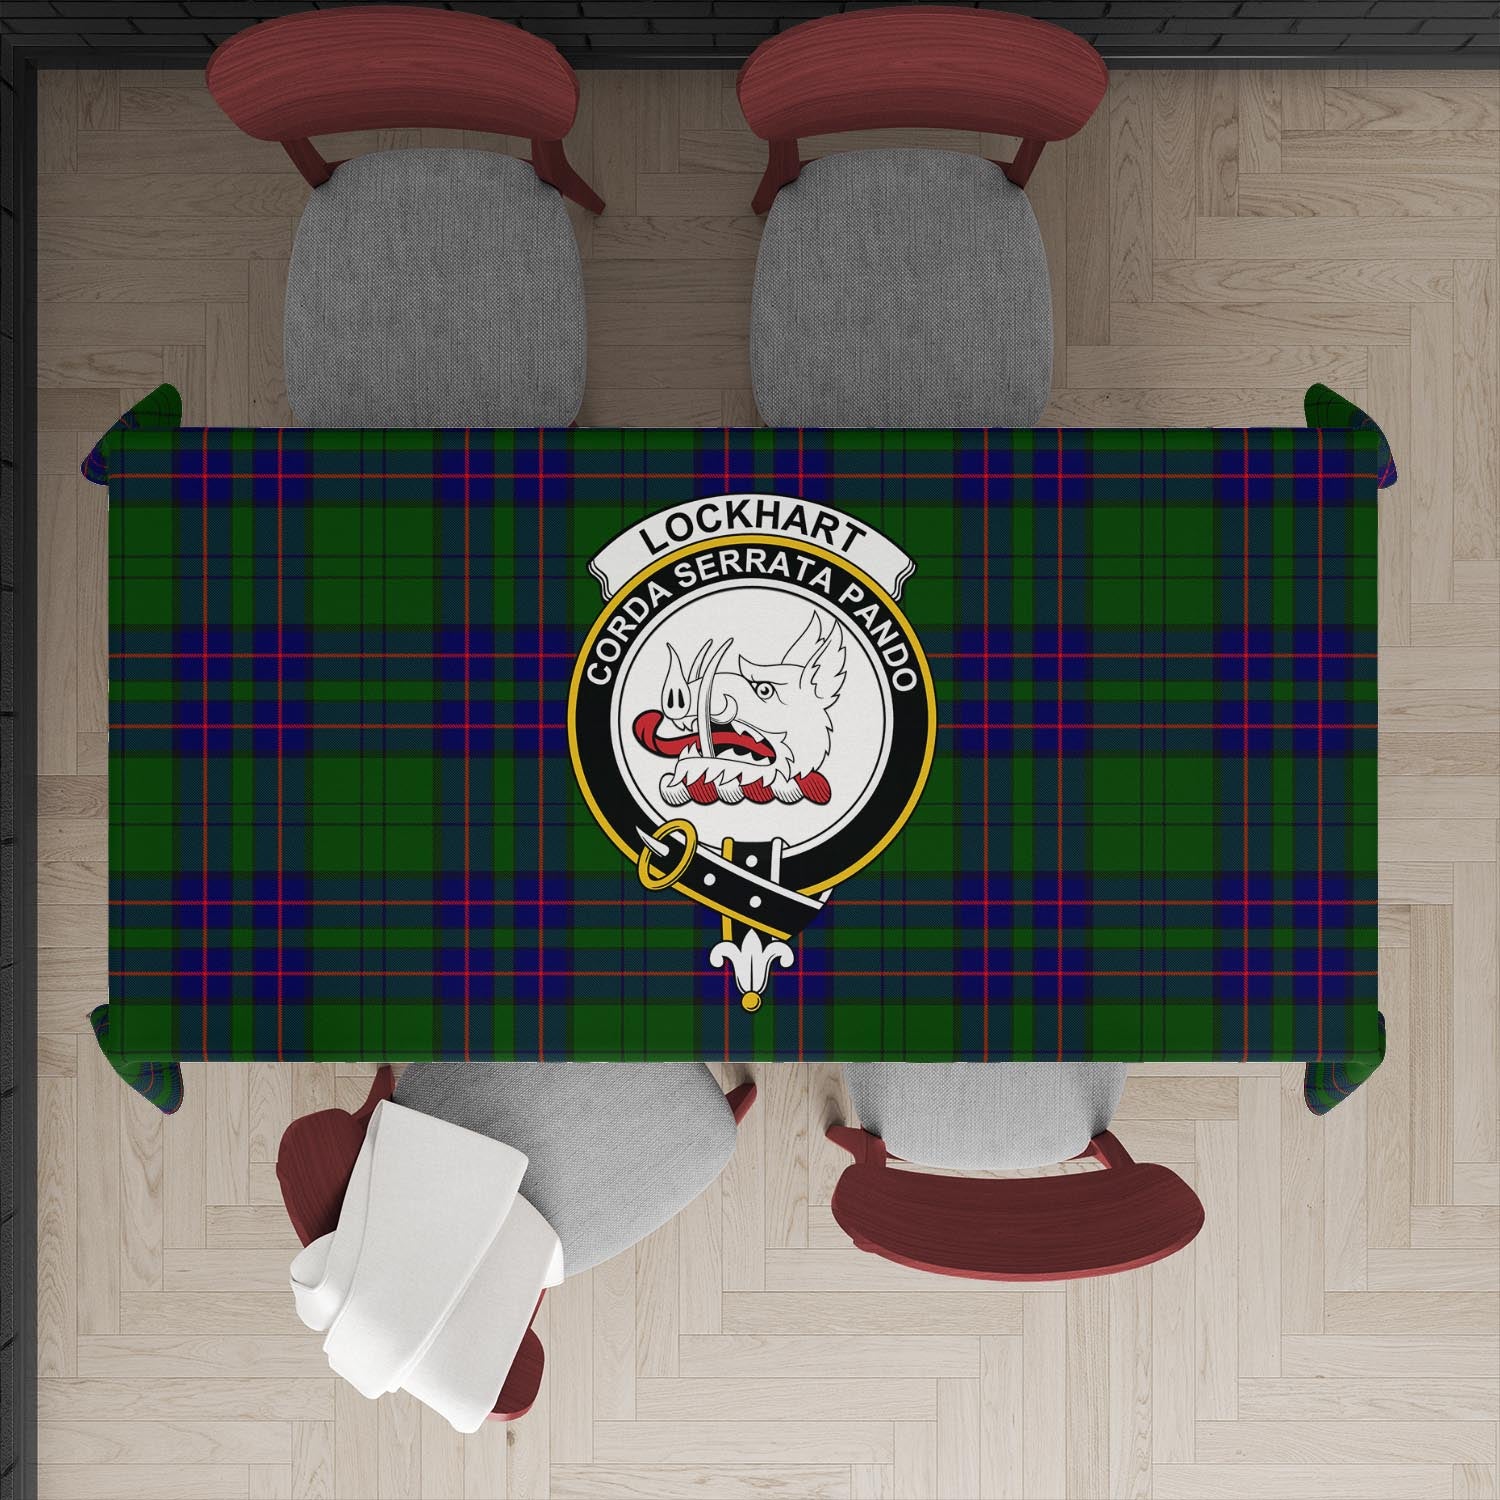 lockhart-modern-tatan-tablecloth-with-family-crest